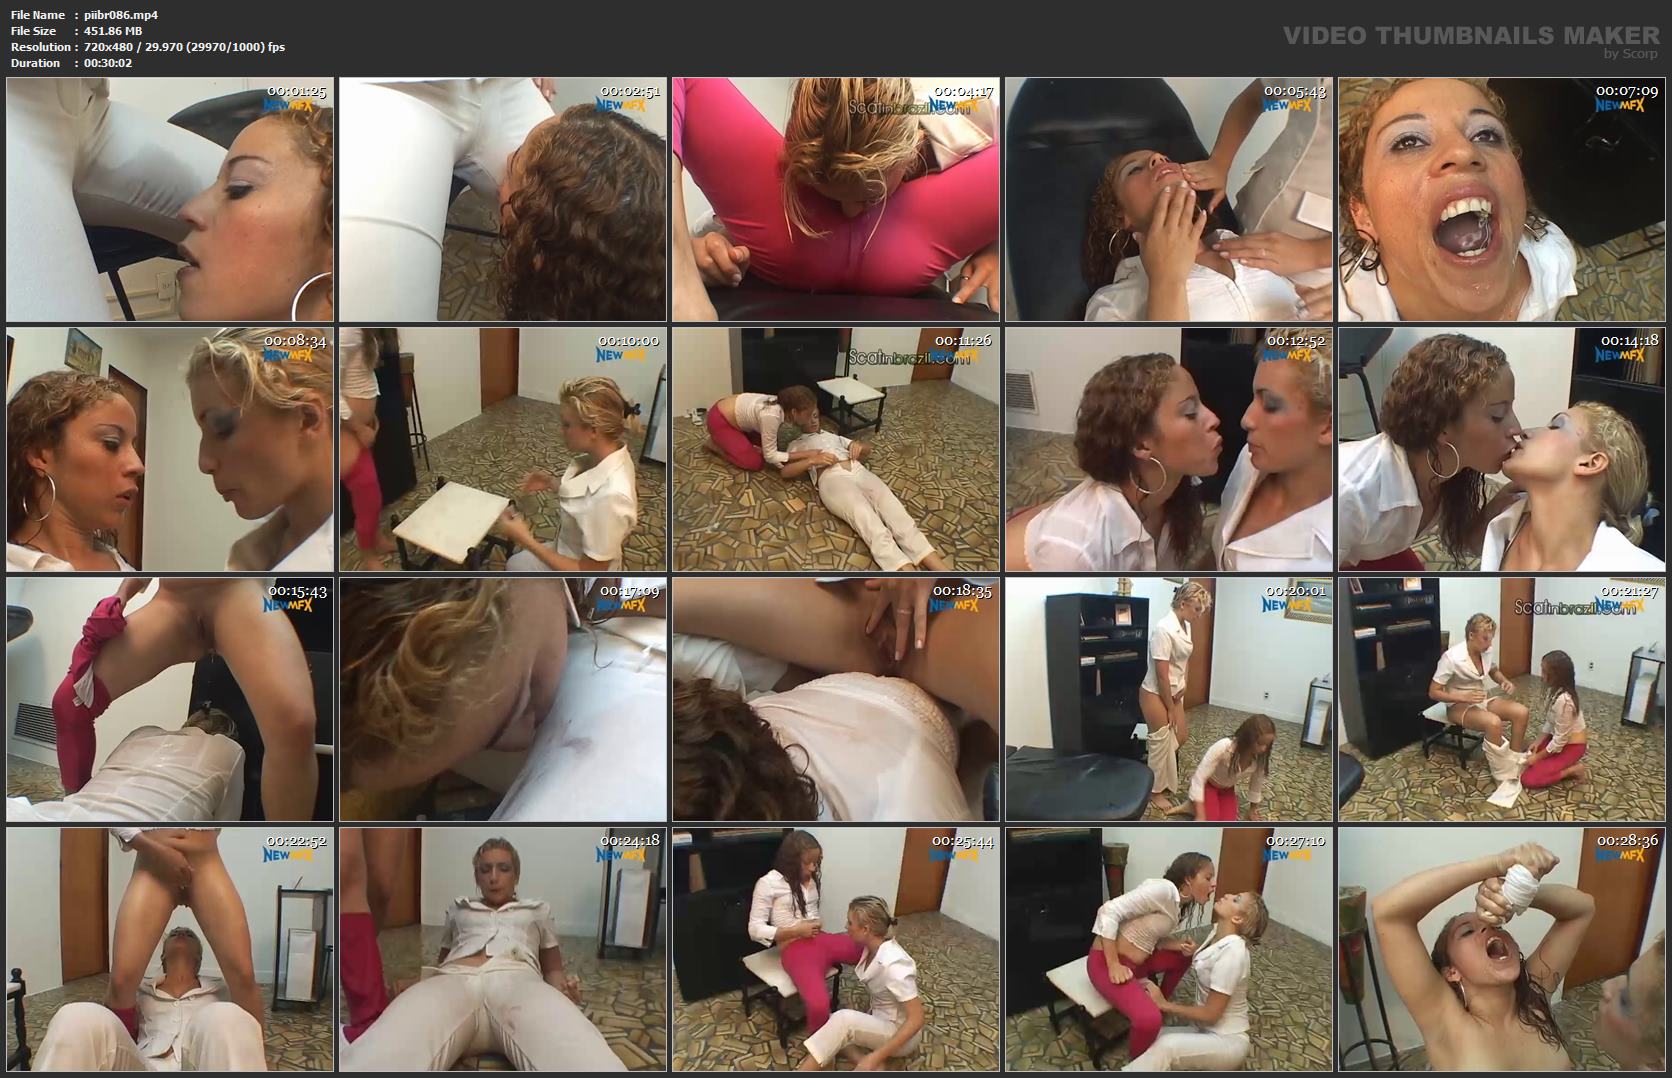 [PISS IN BRAZIL / NEWMFX] MY FAVORITE PATIENT. Featuring: Milly, Karla [SD][480p][MP4]